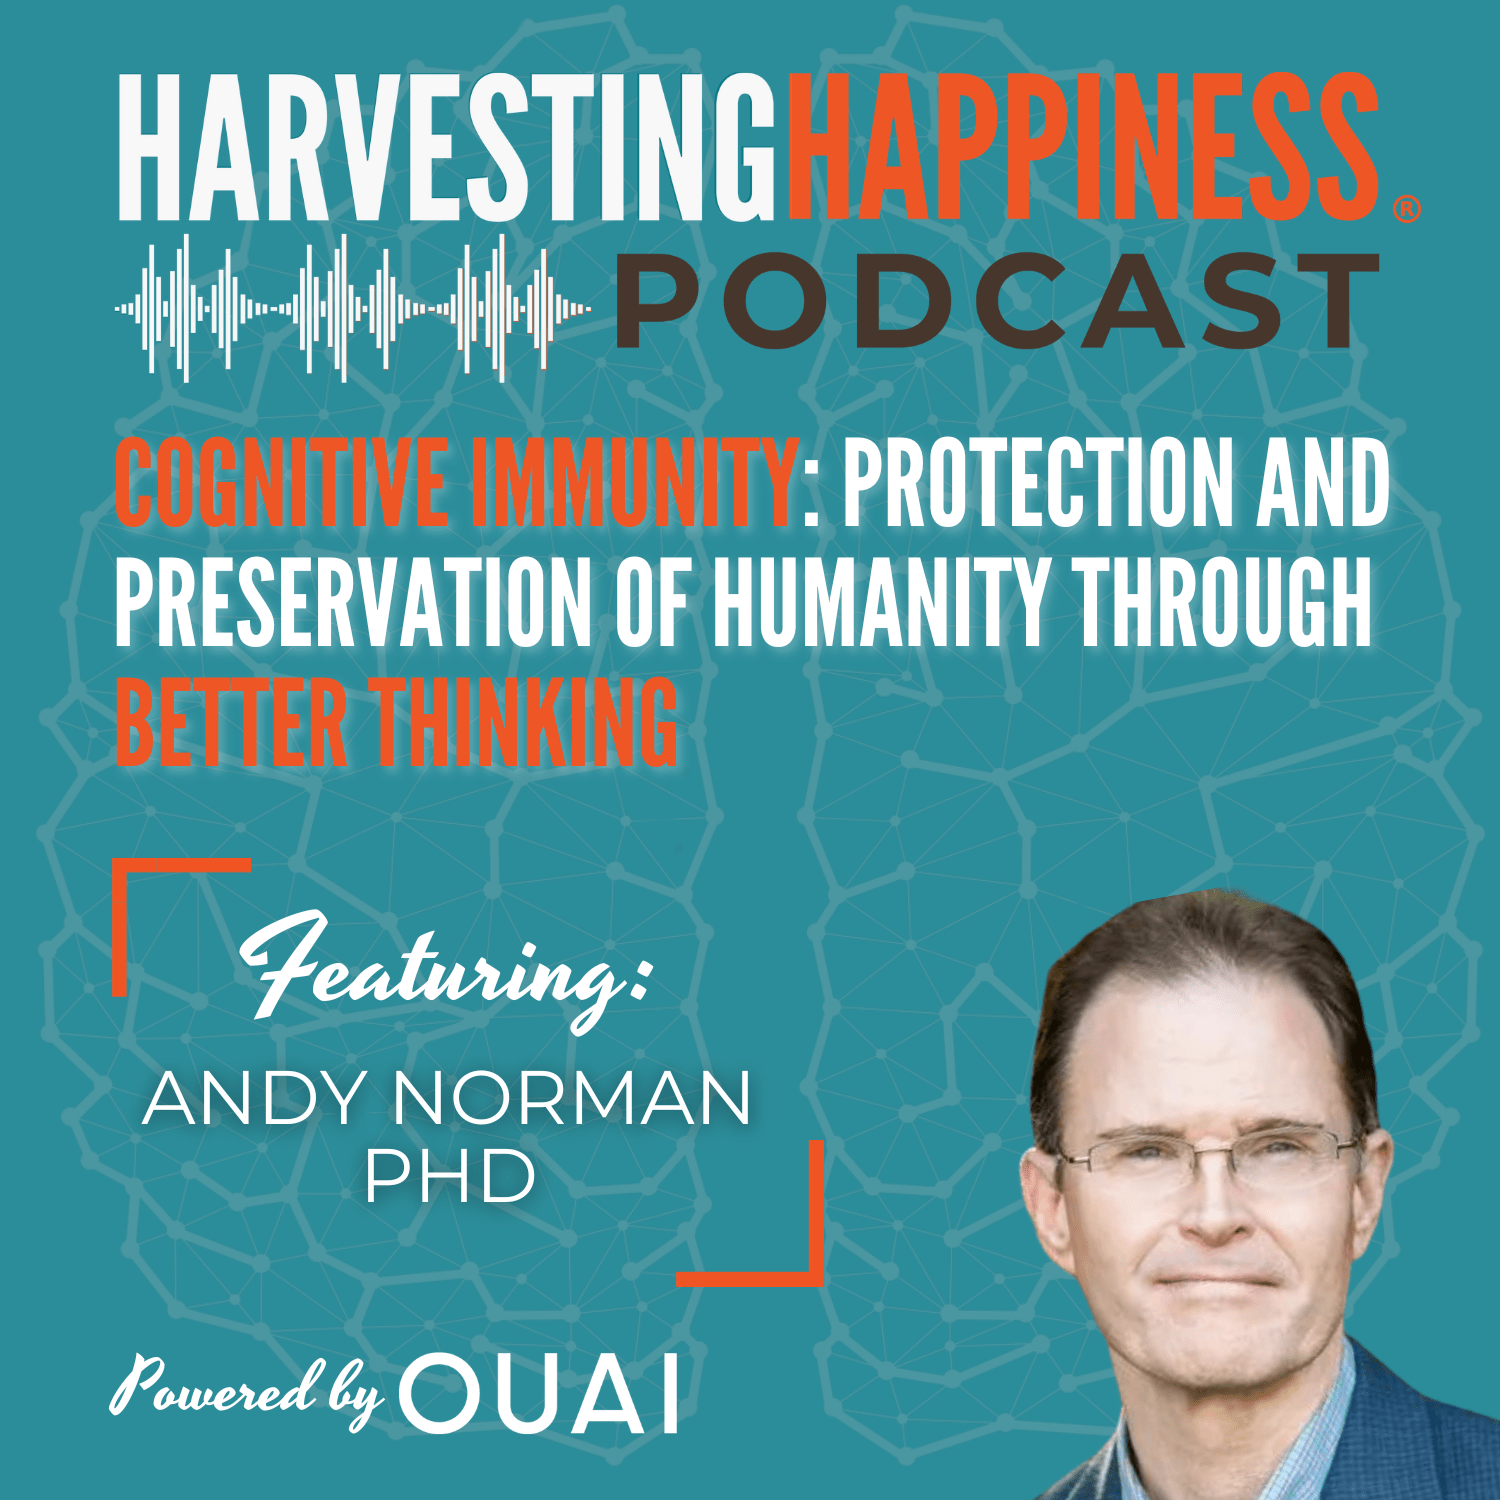 Cognitive Immunity: Protection and Preservation of Humanity through Better Thinking with Andy Norman PhD